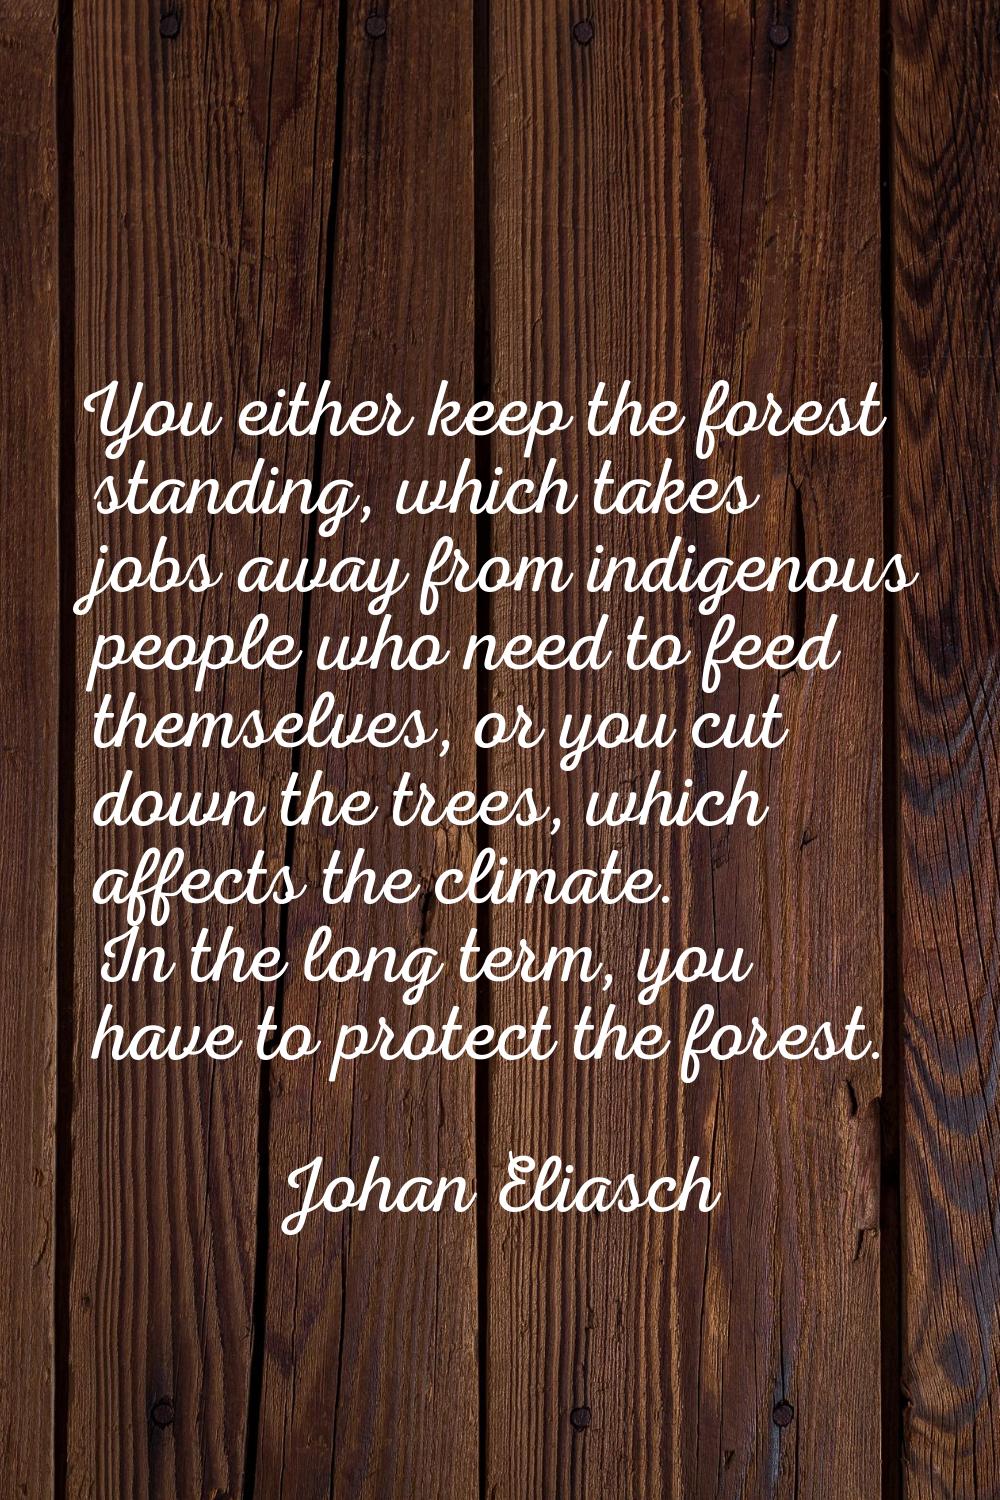 You either keep the forest standing, which takes jobs away from indigenous people who need to feed 